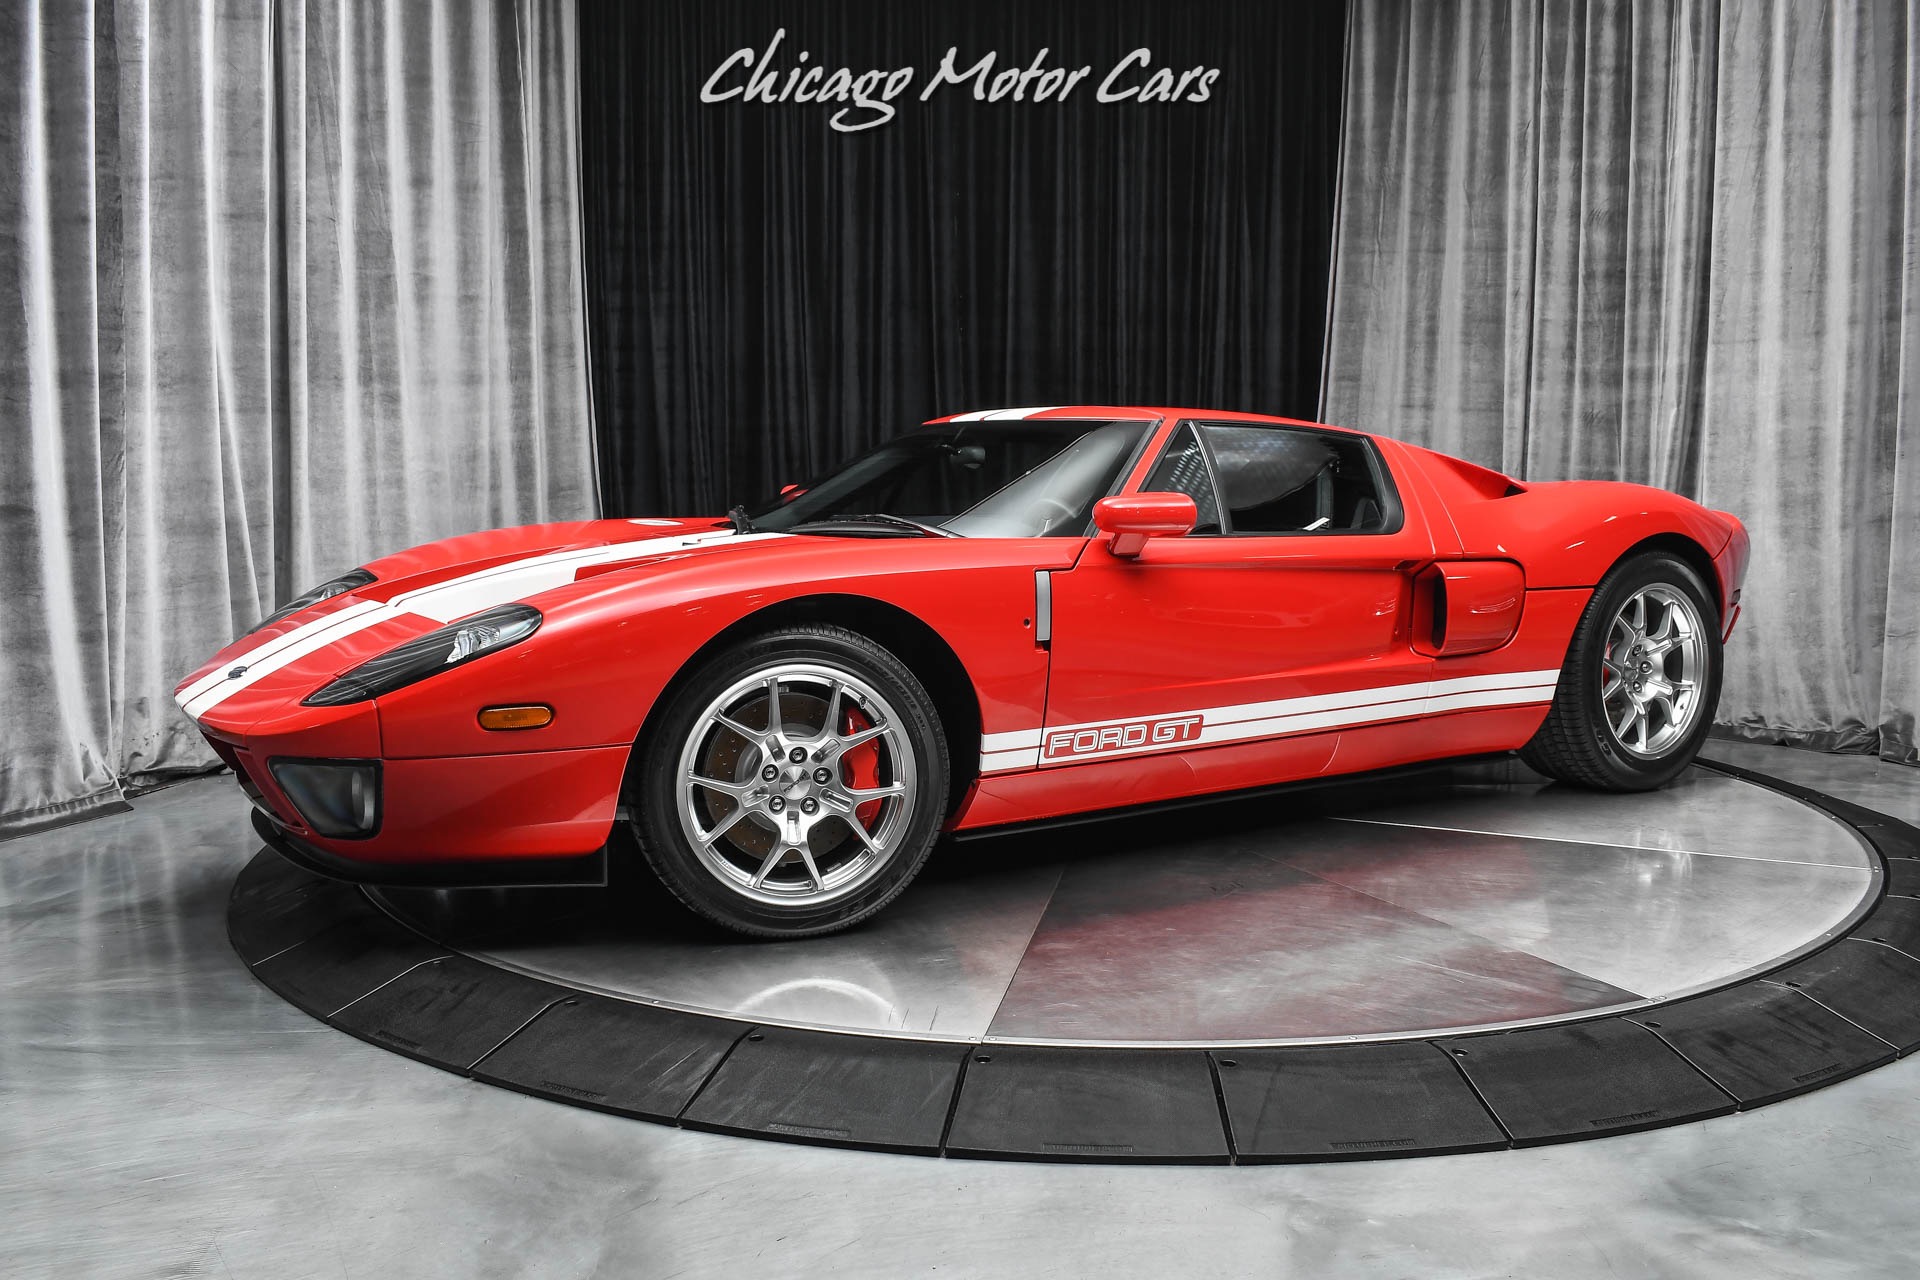 Used 2005 Ford GT ONLY 92 ORIGINAL MILES! COLLECTOR QUALITY! ALL 4